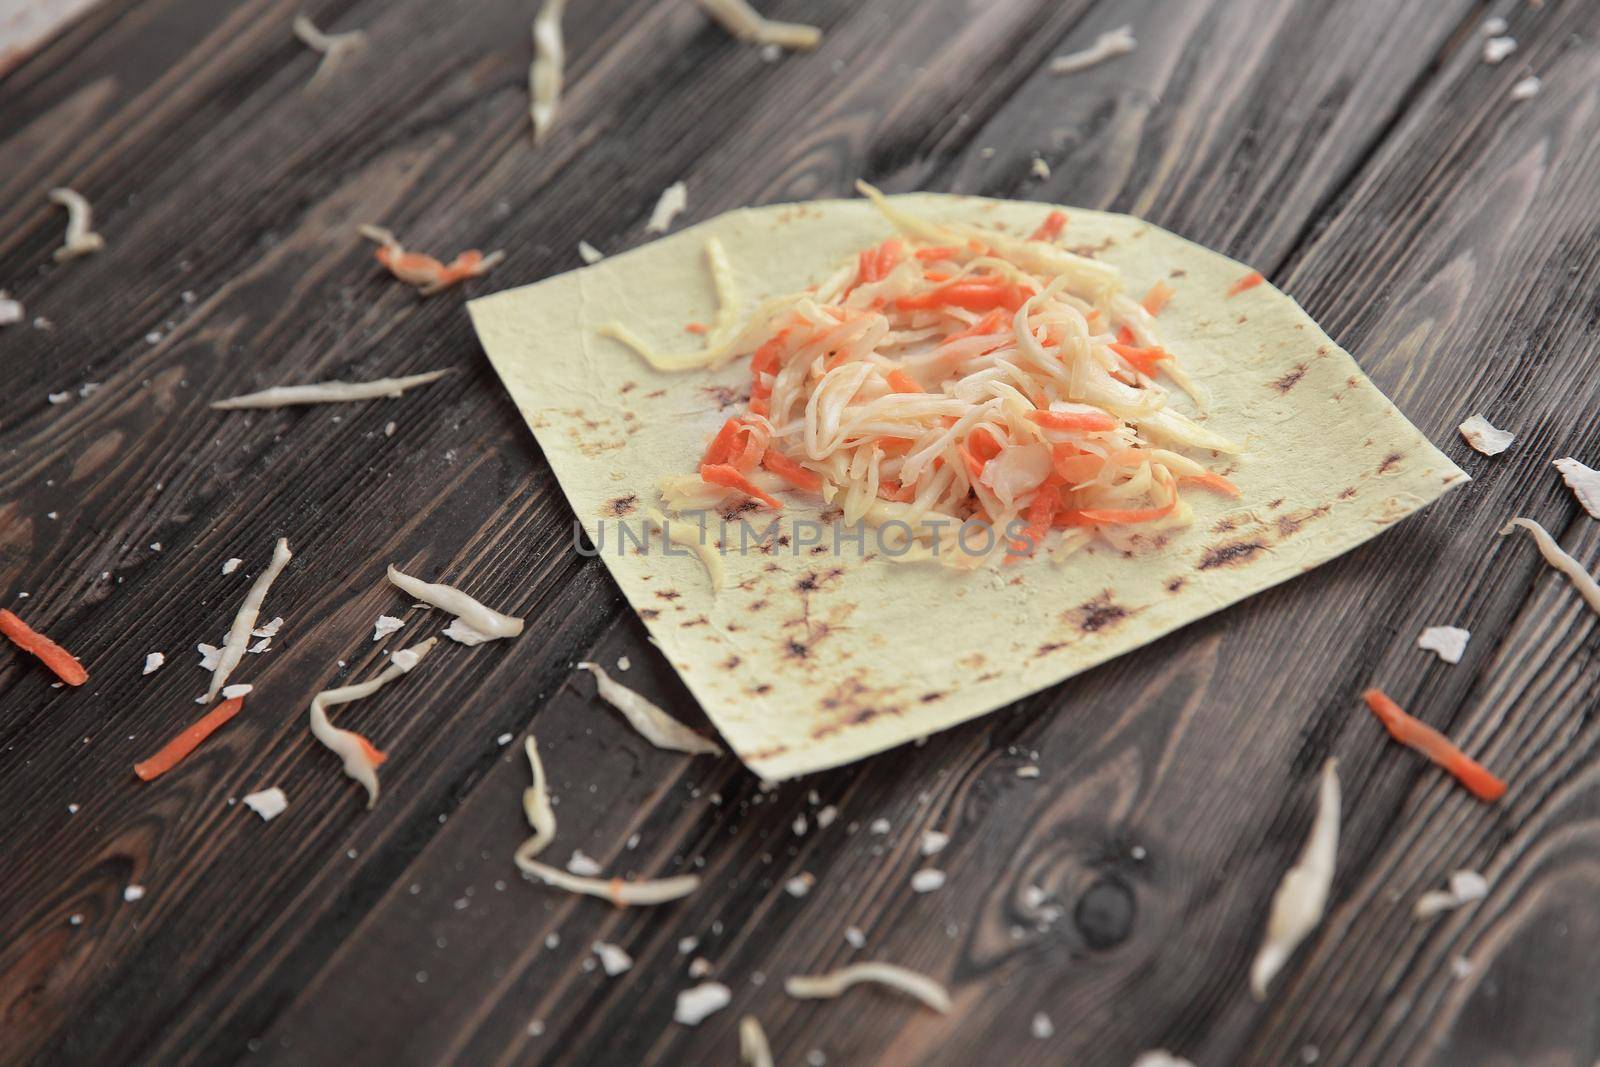 pickled cabbage on a pita.preparation of Shawarma. photo with copy space.